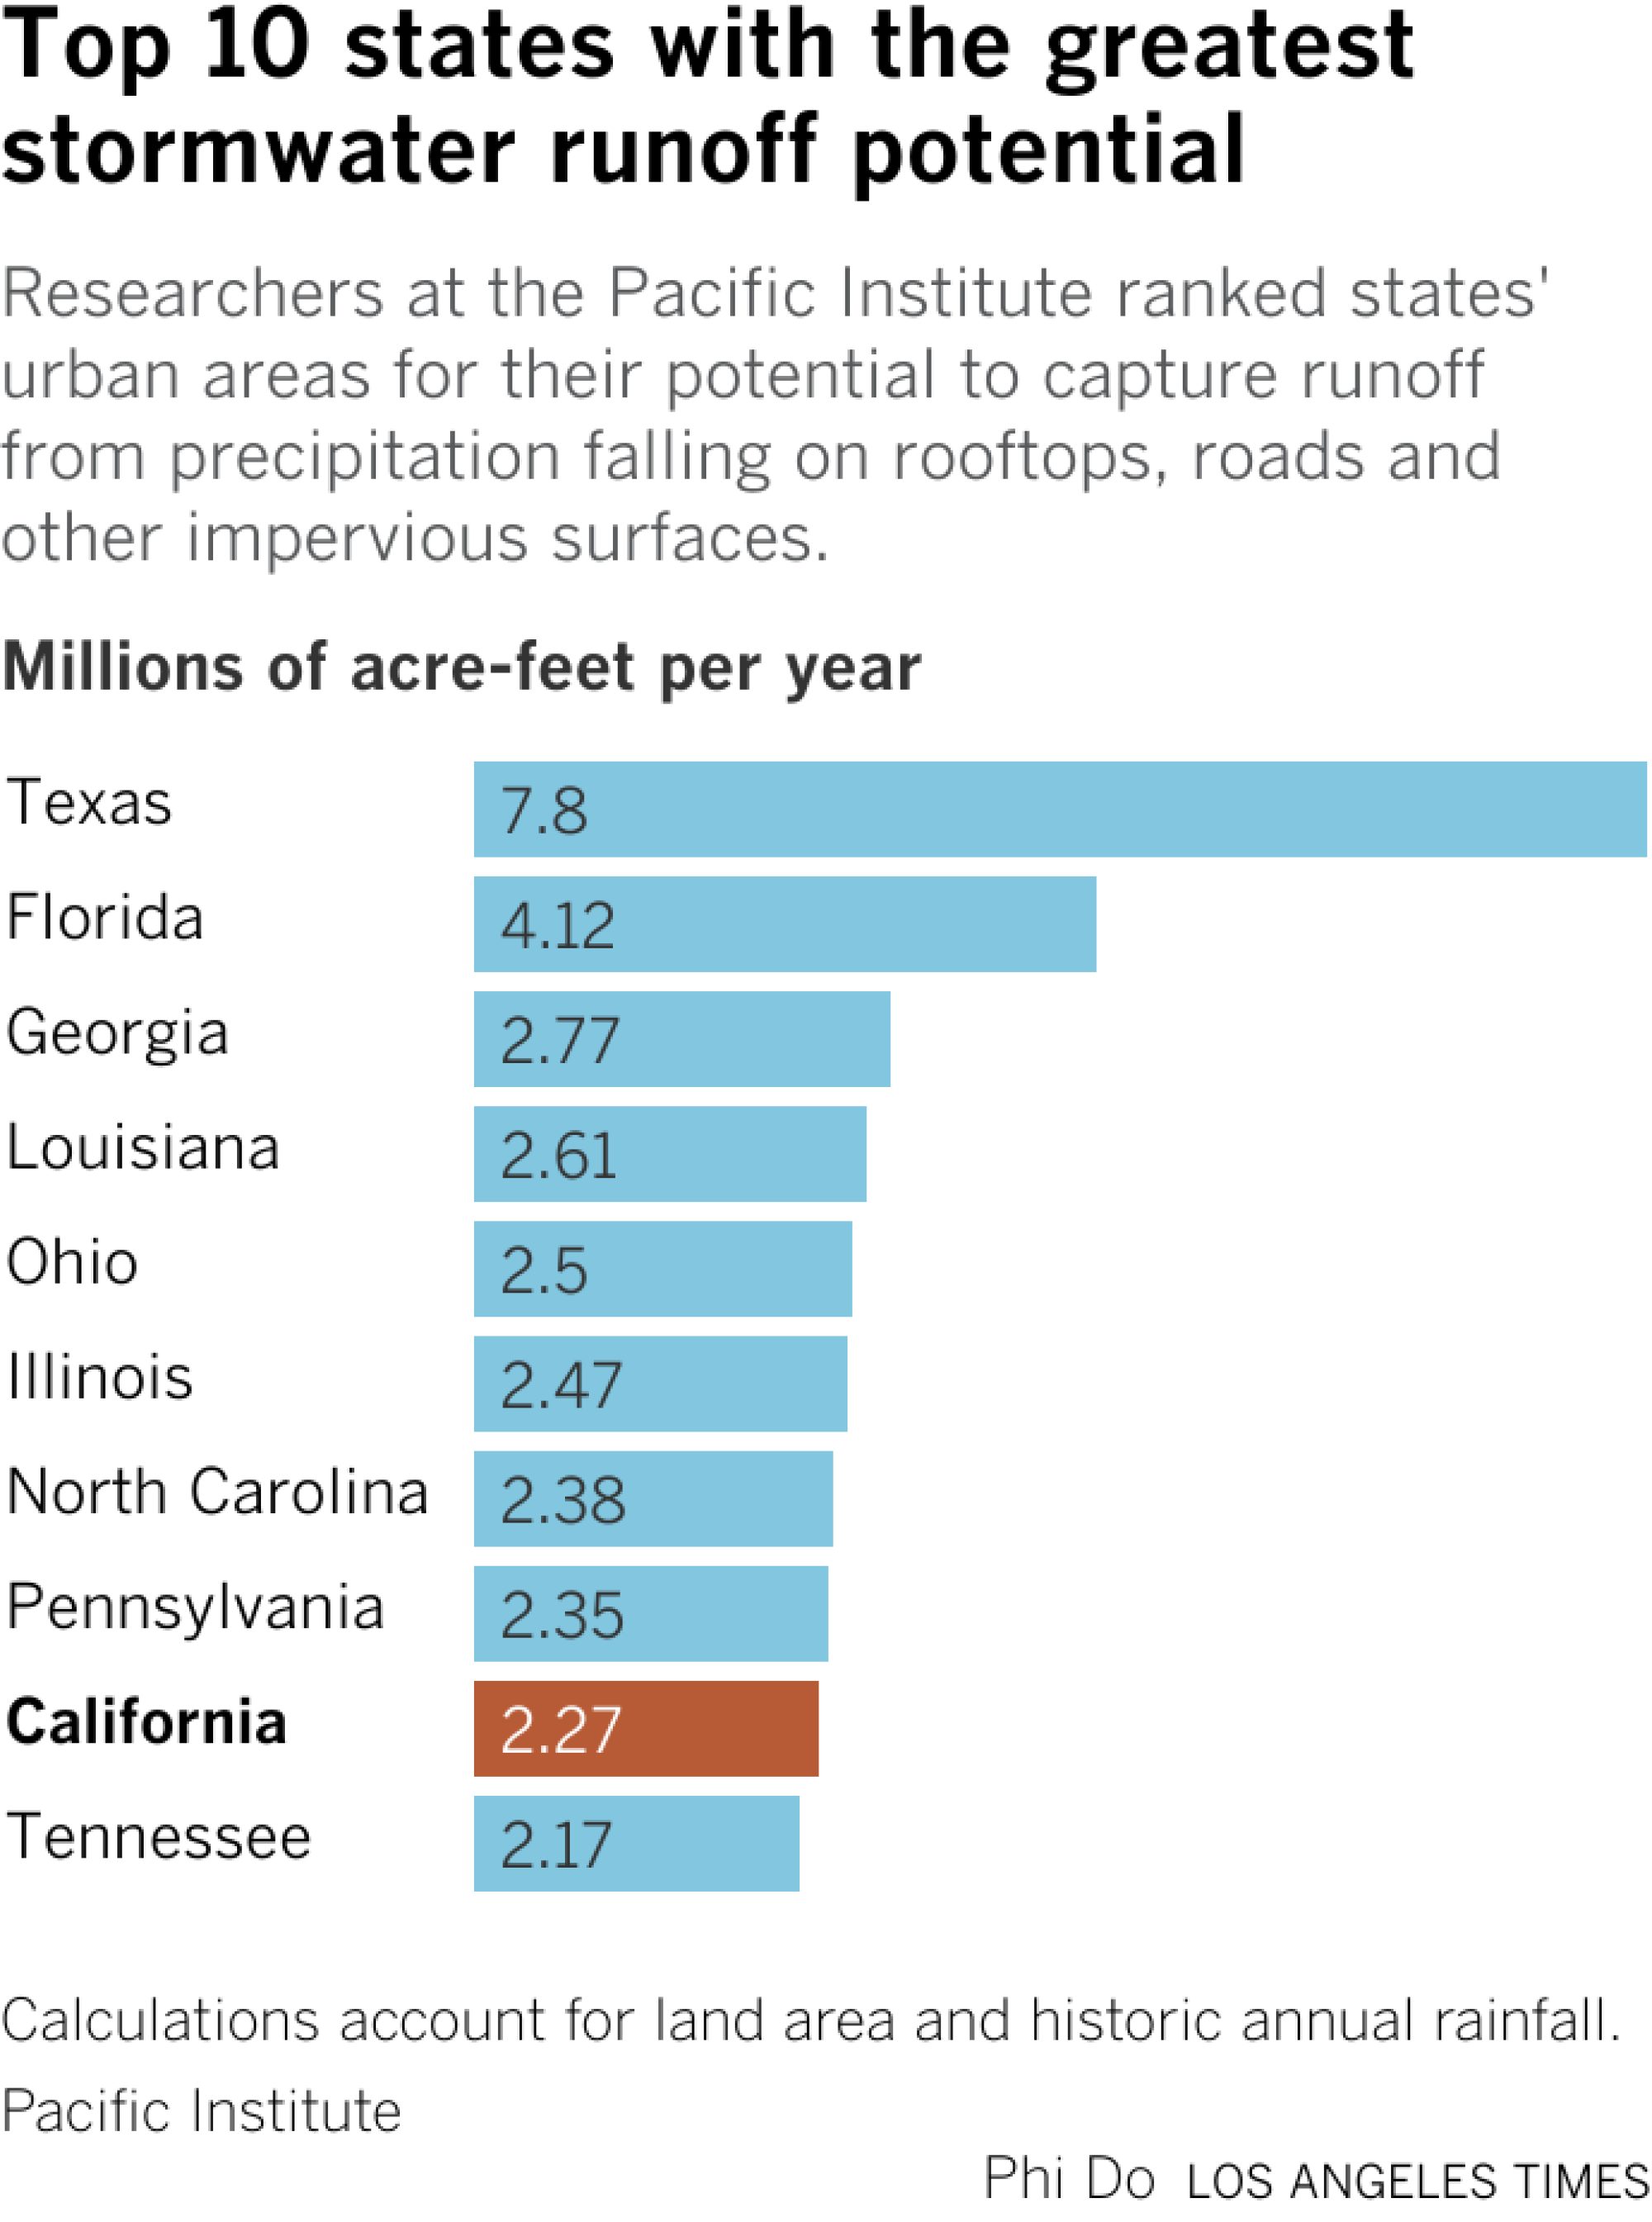 Bar chart showing states with the greatest stormwater runoff potential